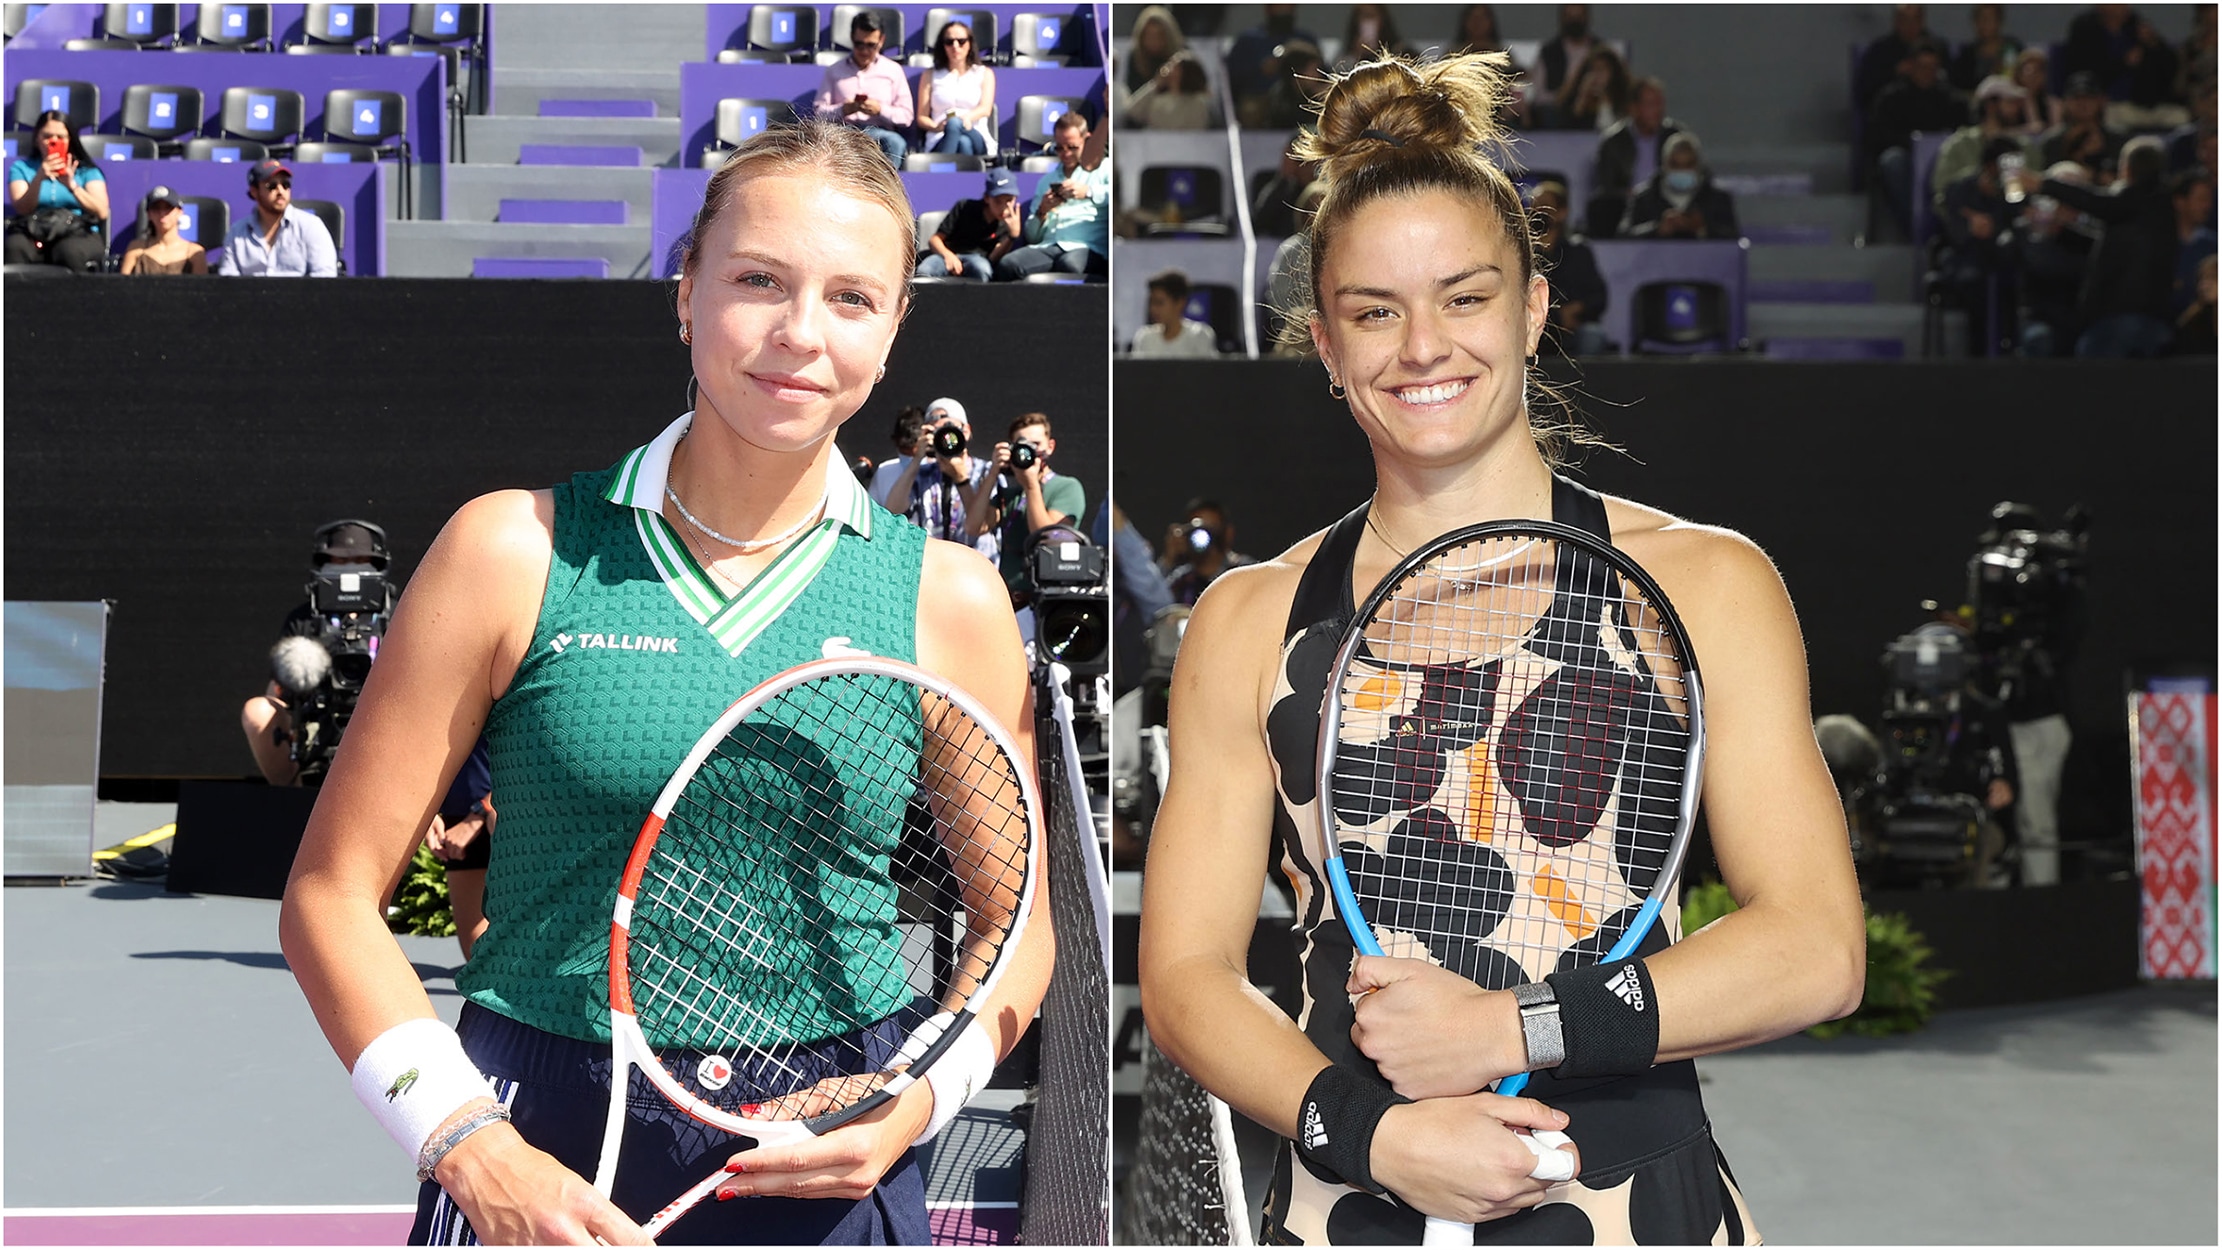 Semifinal Preview, WTA Finals Kontaveit and Sakkari to meet for 12th time, with a title match against Muguruza on the line